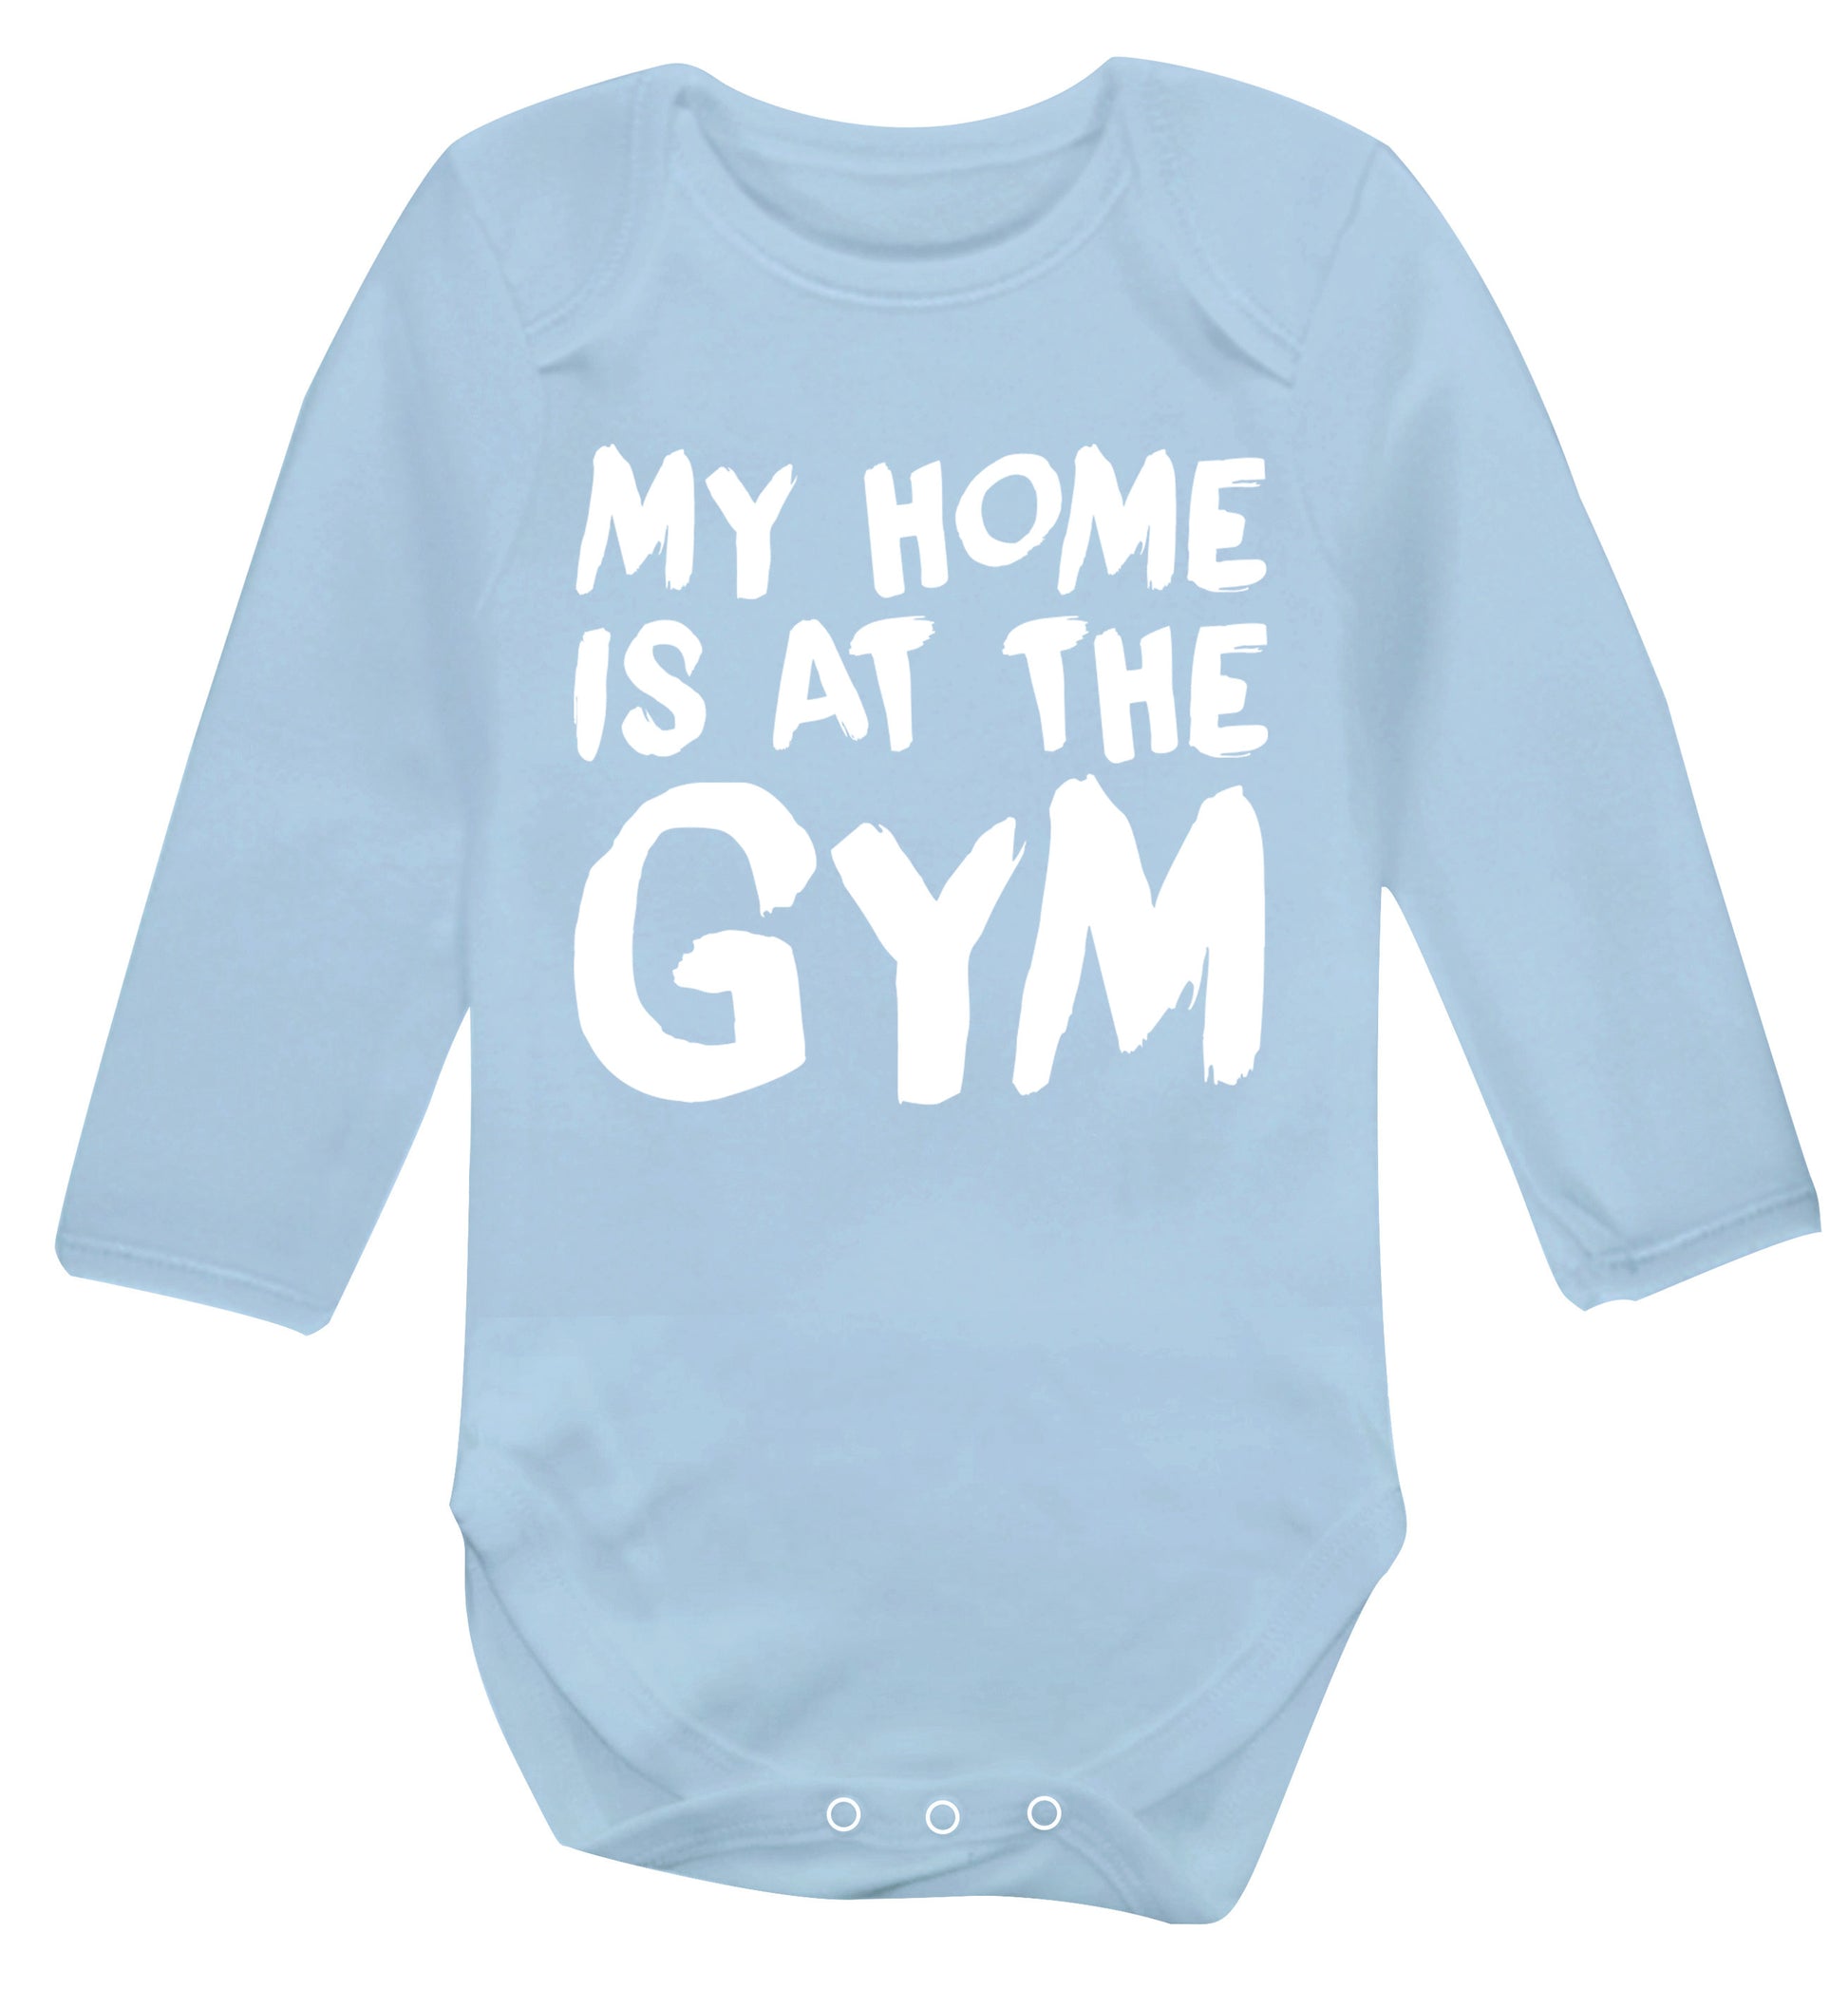 My home is at the gym Baby Vest long sleeved pale blue 6-12 months